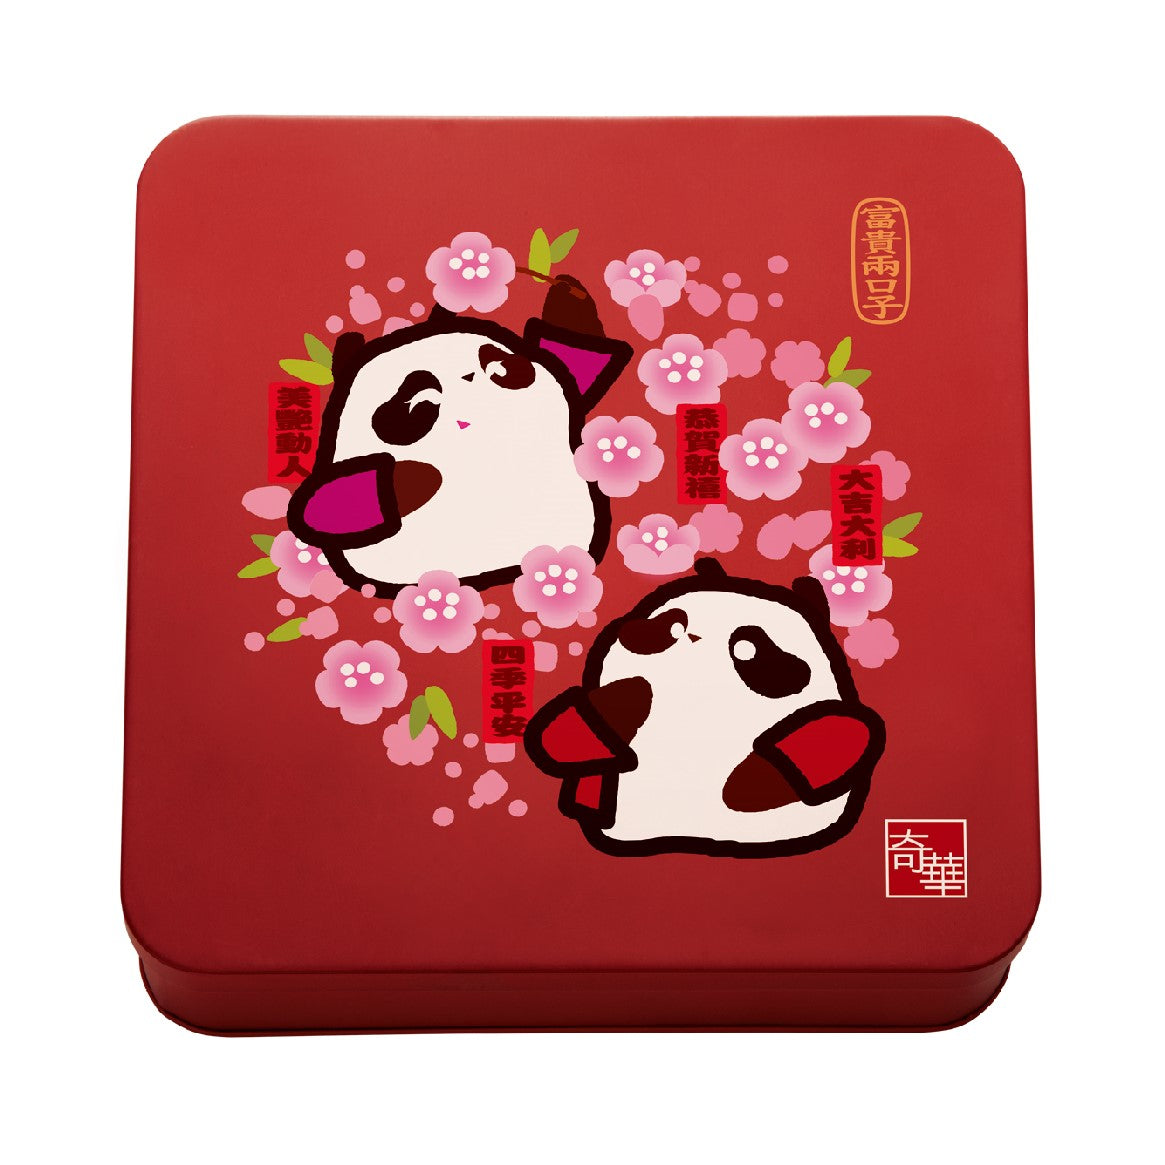 Chinese New Year Panda Sweetheart Cookies Gift Box Special Edition 賀年兩口子熊貓曲奇特別版